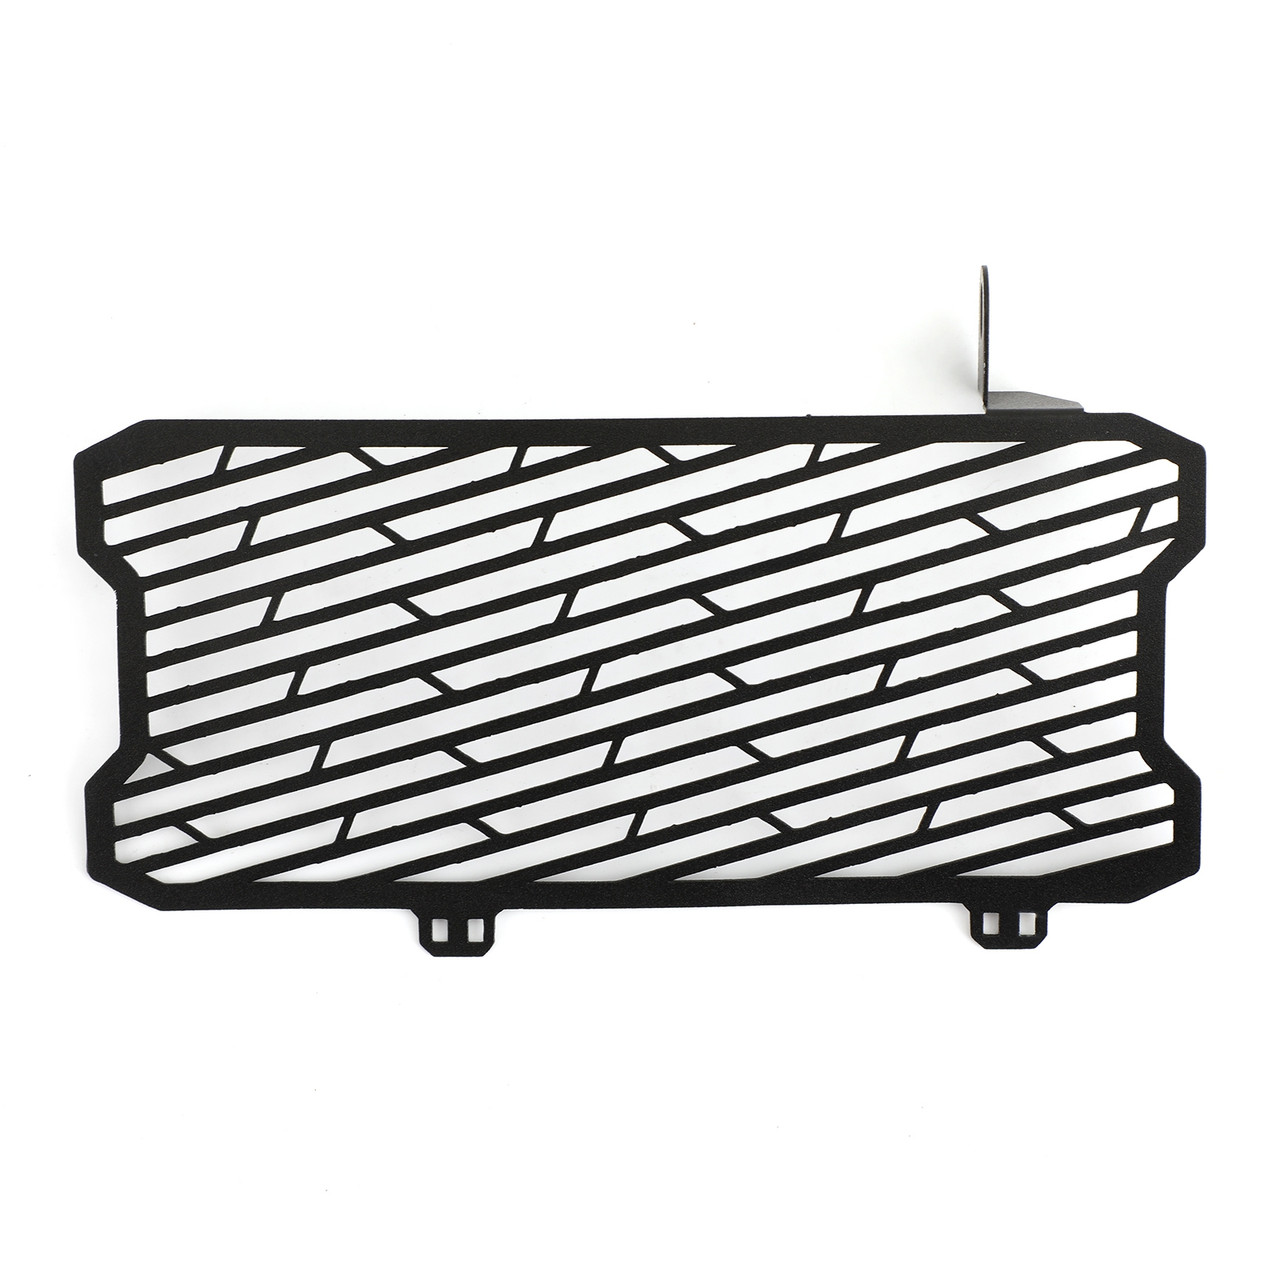 Radiator Guard Grill Cover Protector for Yamaha MT-15 18-19 Black